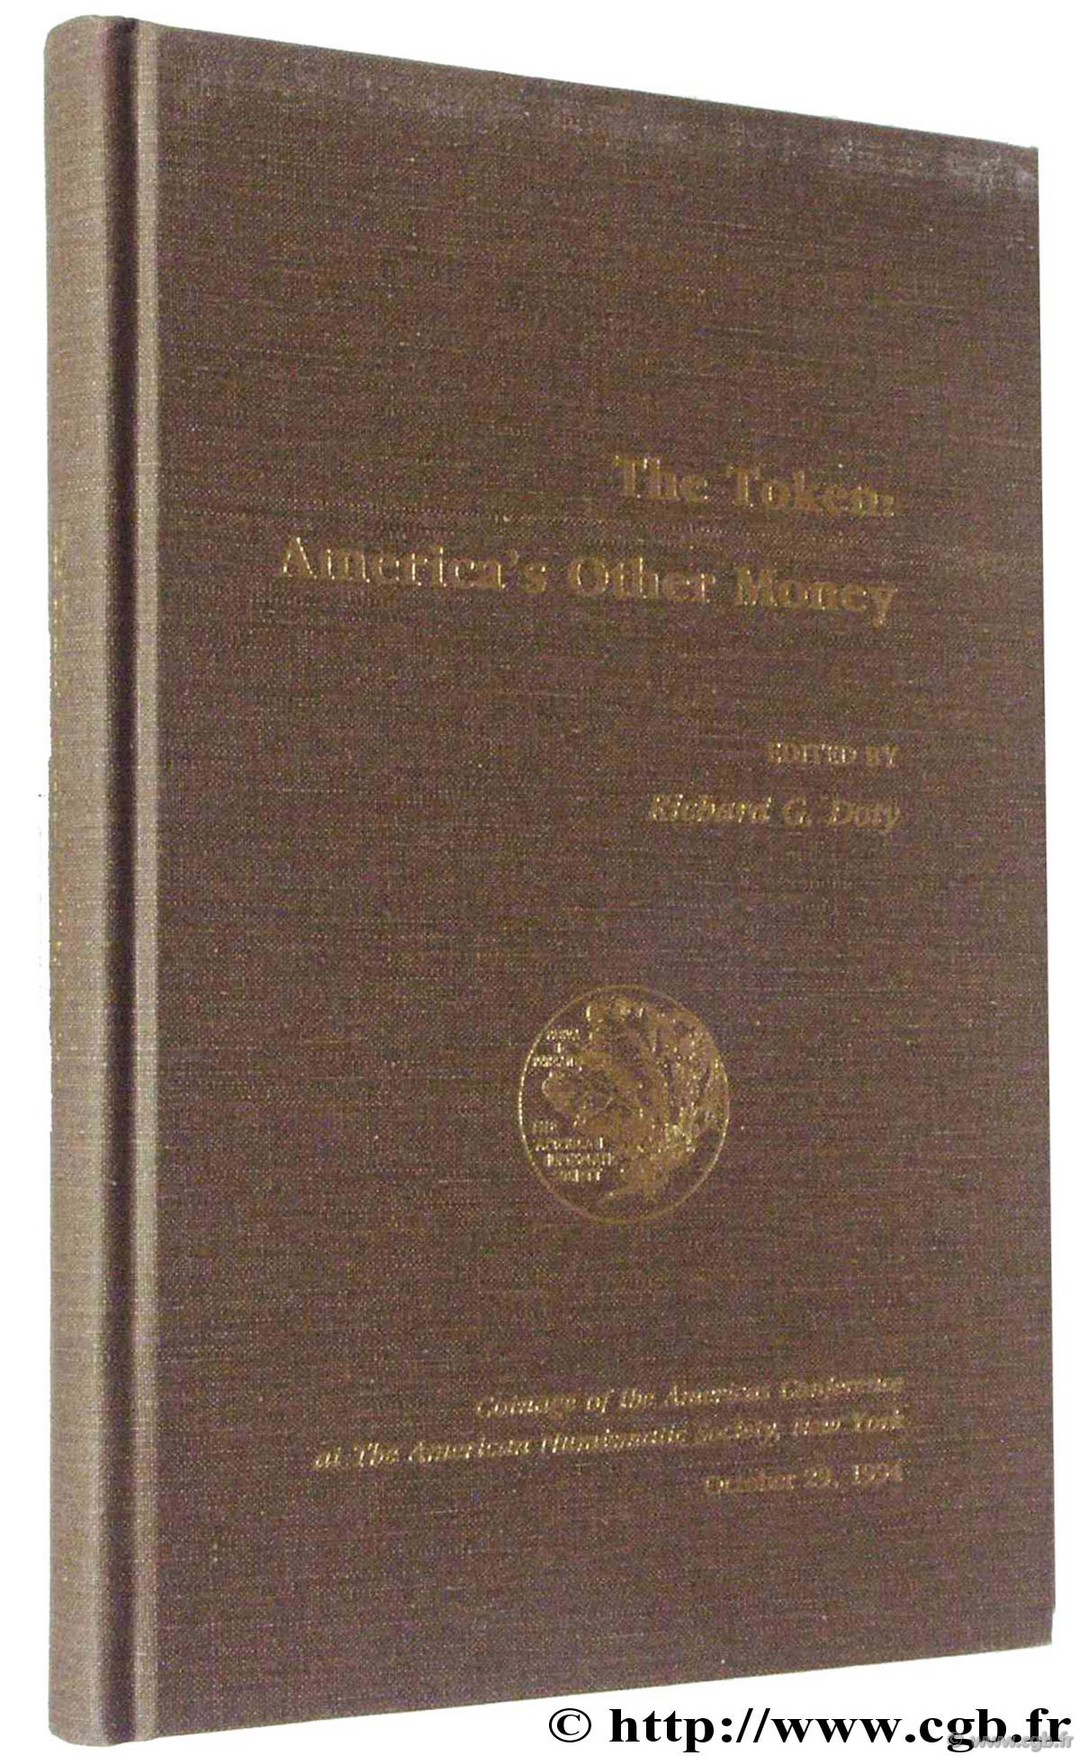 The Token : America s Other Money, Coinage of the Americas Conférence at the American Numismatic Society, New York October 29, 1994 